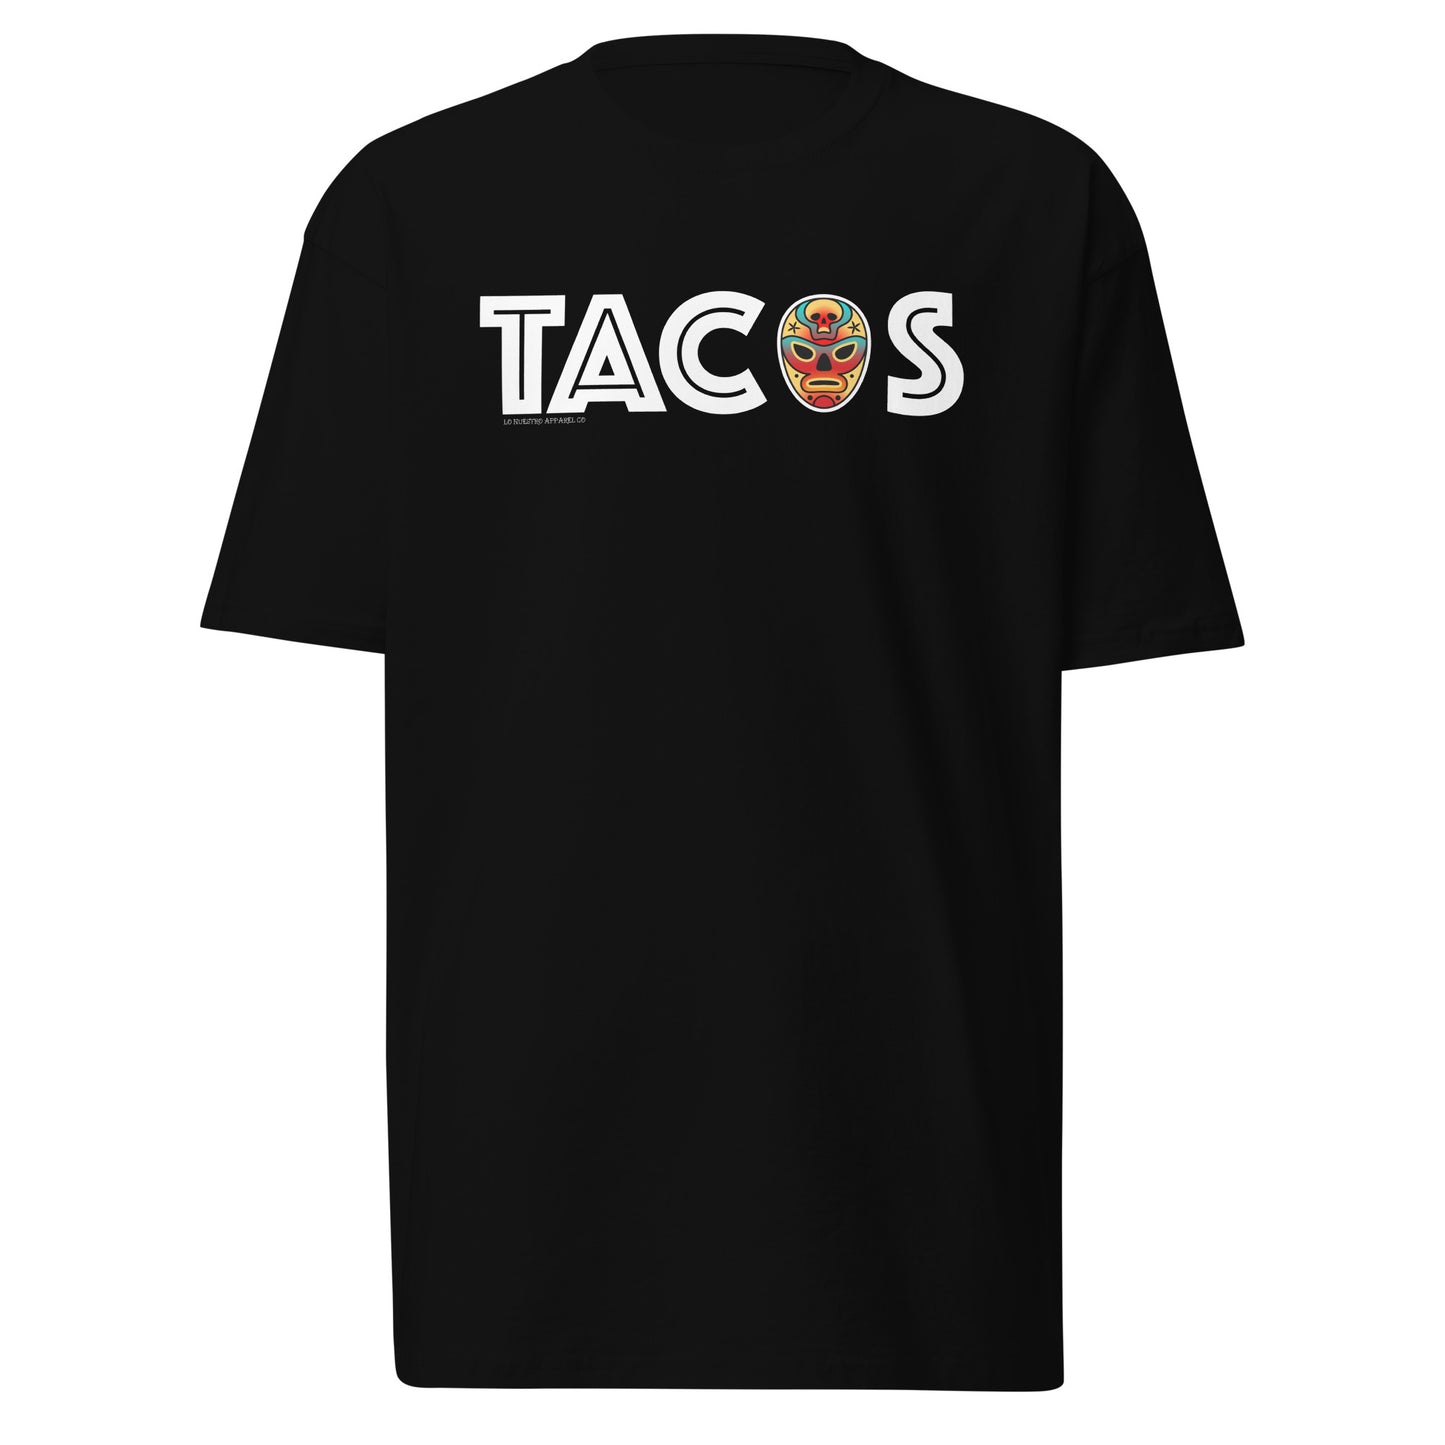 Black "TACOS" T-shirt with white text and a colorful luchador mask.